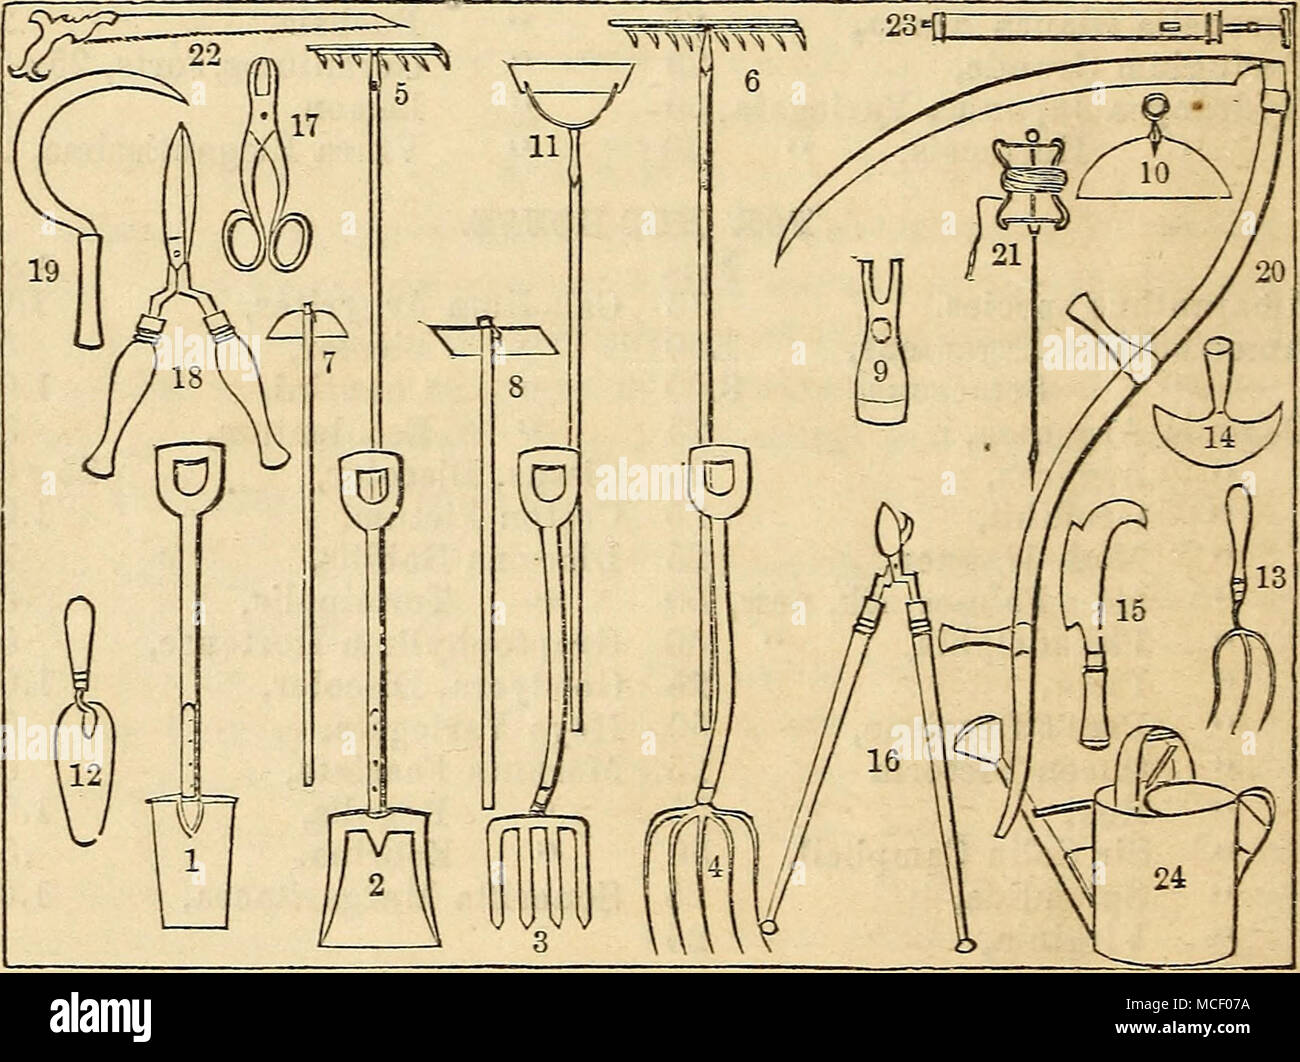 . No. 1, of the diagram, represents the ordinary cast steel Garden Spade. No. 2, a cast steel Shovel, D handled, for taking up rubbish, &amp;c. No. 3, steel Digging Fork, indispensa- ble to every garden. No. 4, steel Manure Fork. No. 5, steel Garden Rake. No. 6, Lawn Rake. No. 7, Turnip, or Onion Hoe. No. 8, cast steel Garden Hoe. No. 9, steel-pronged Hoe. No. 10, Crescent Socket Hoe. No. 11, Scuffle, or Dutch Hoe. No. 12, Garden Trowel. No. 13, steel &quot;Weeding Fork. No. 14, cast steel Grass Edging Knife. No. 15, short-handled Bill, or Briar Hook. No. 16, strong long-handled Pruning Shears Stock Photo